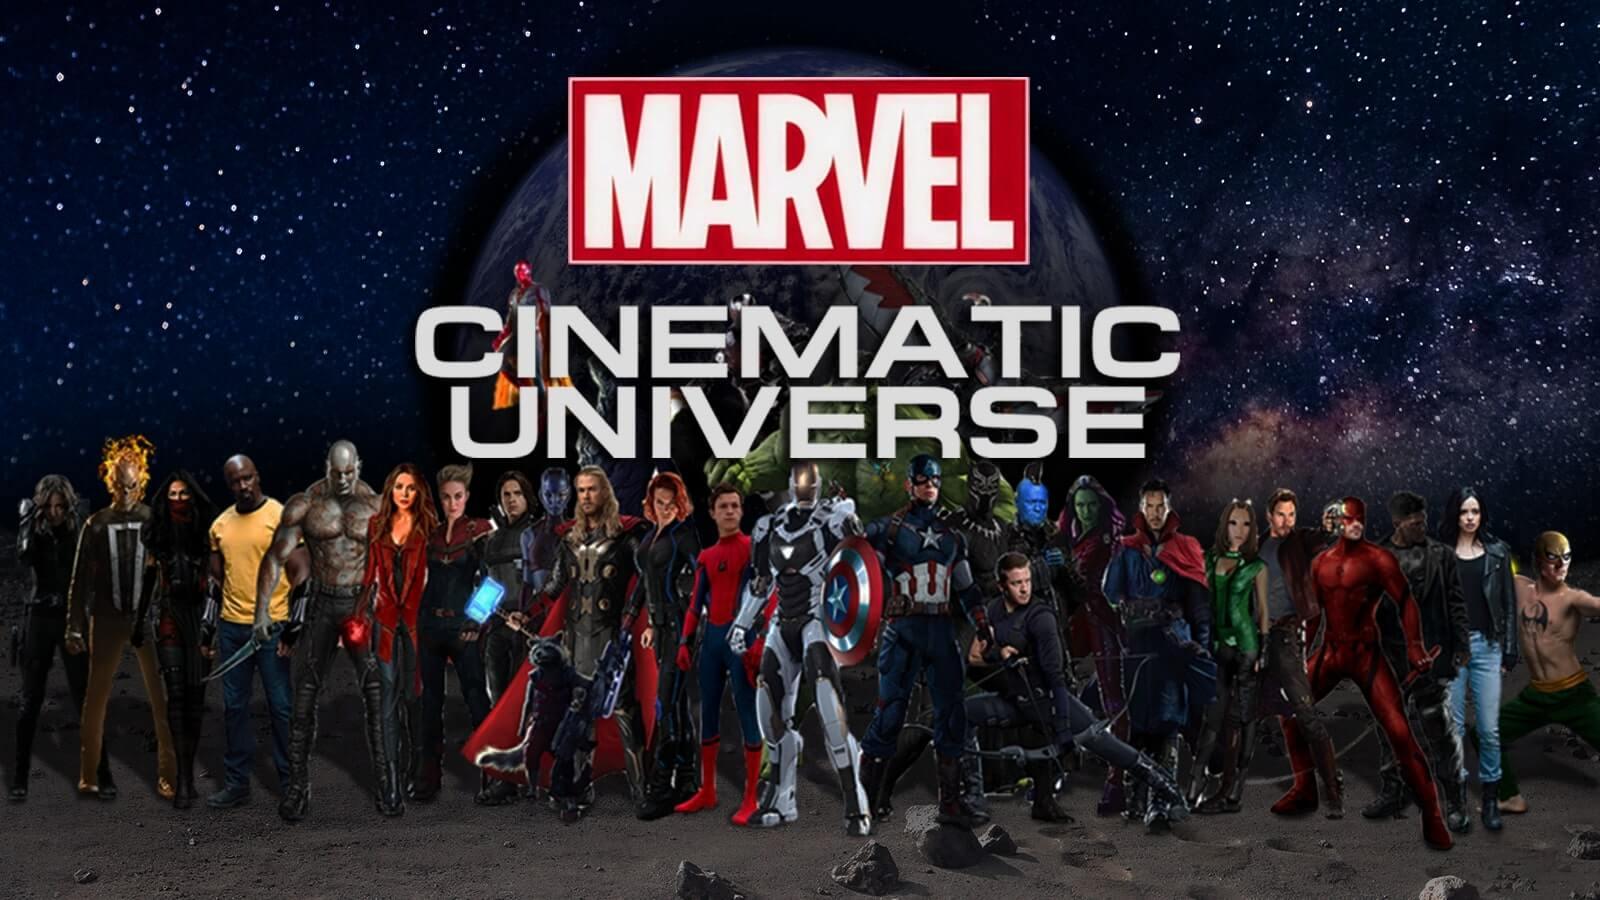 Over 150 Grads Credited Throughout Marvel Cinematic Universe